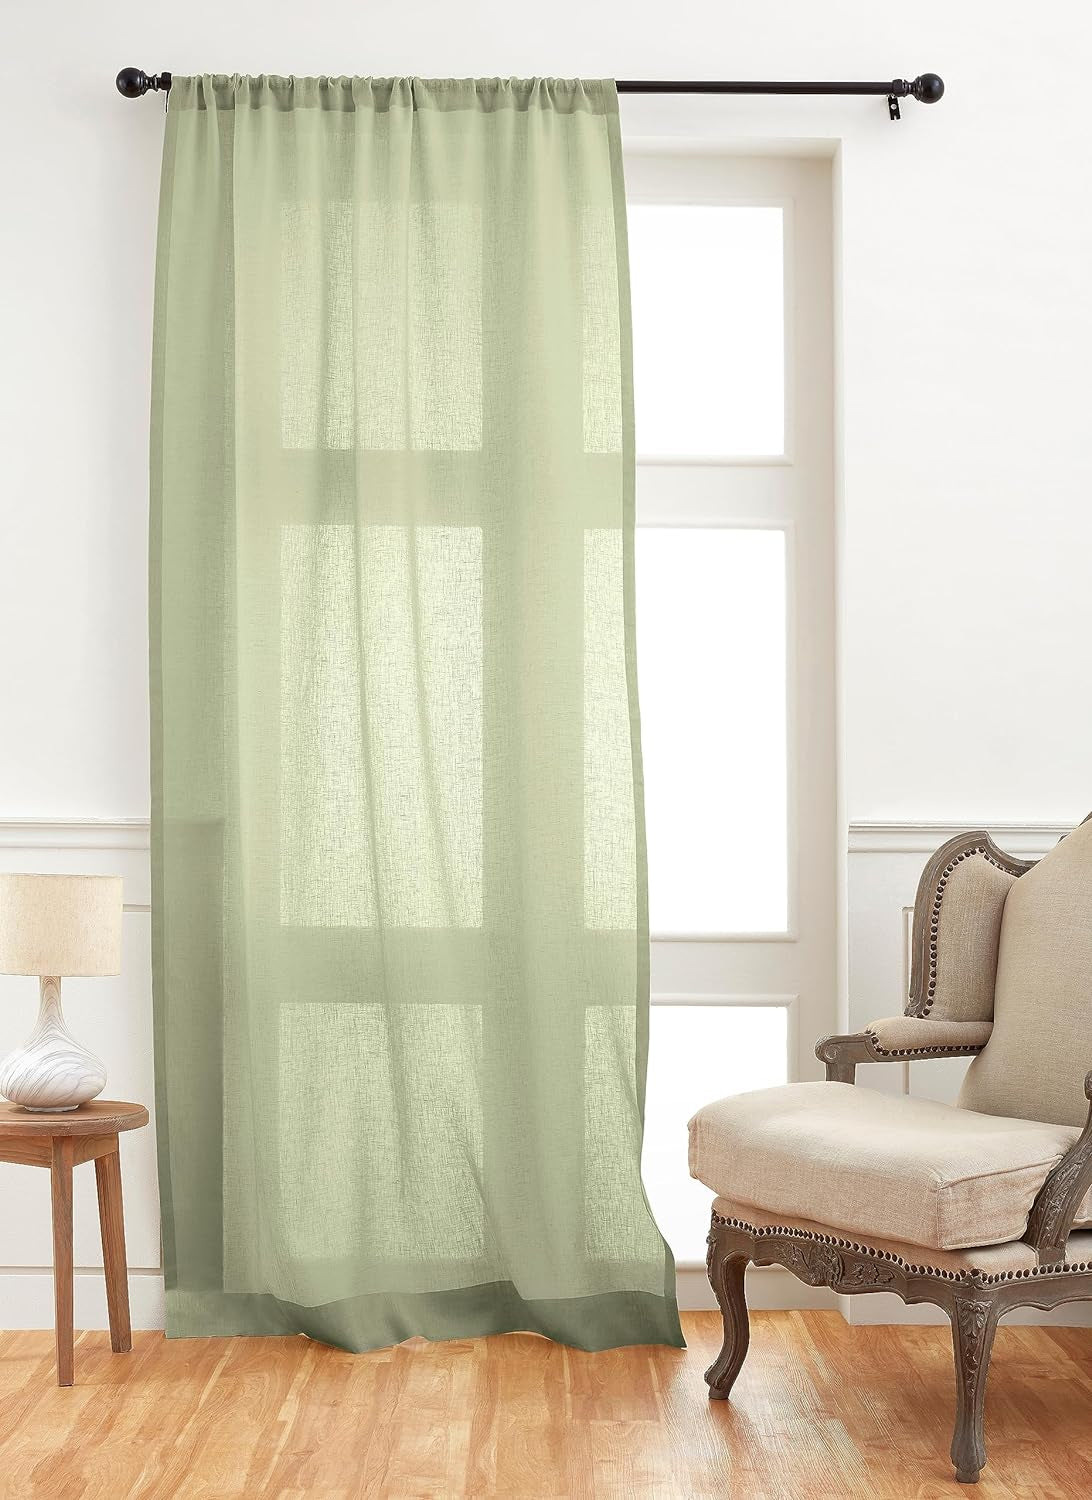 Solino Home Linen Sheer Curtain – 52 X 45 Inch Light Natural Rod Pocket Window Panel – 100% Pure Natural Fabric Curtain for Living Room, Indoor, Outdoor – Handcrafted from European Flax  Solino Home Sage Green 52 X 144 Inch 